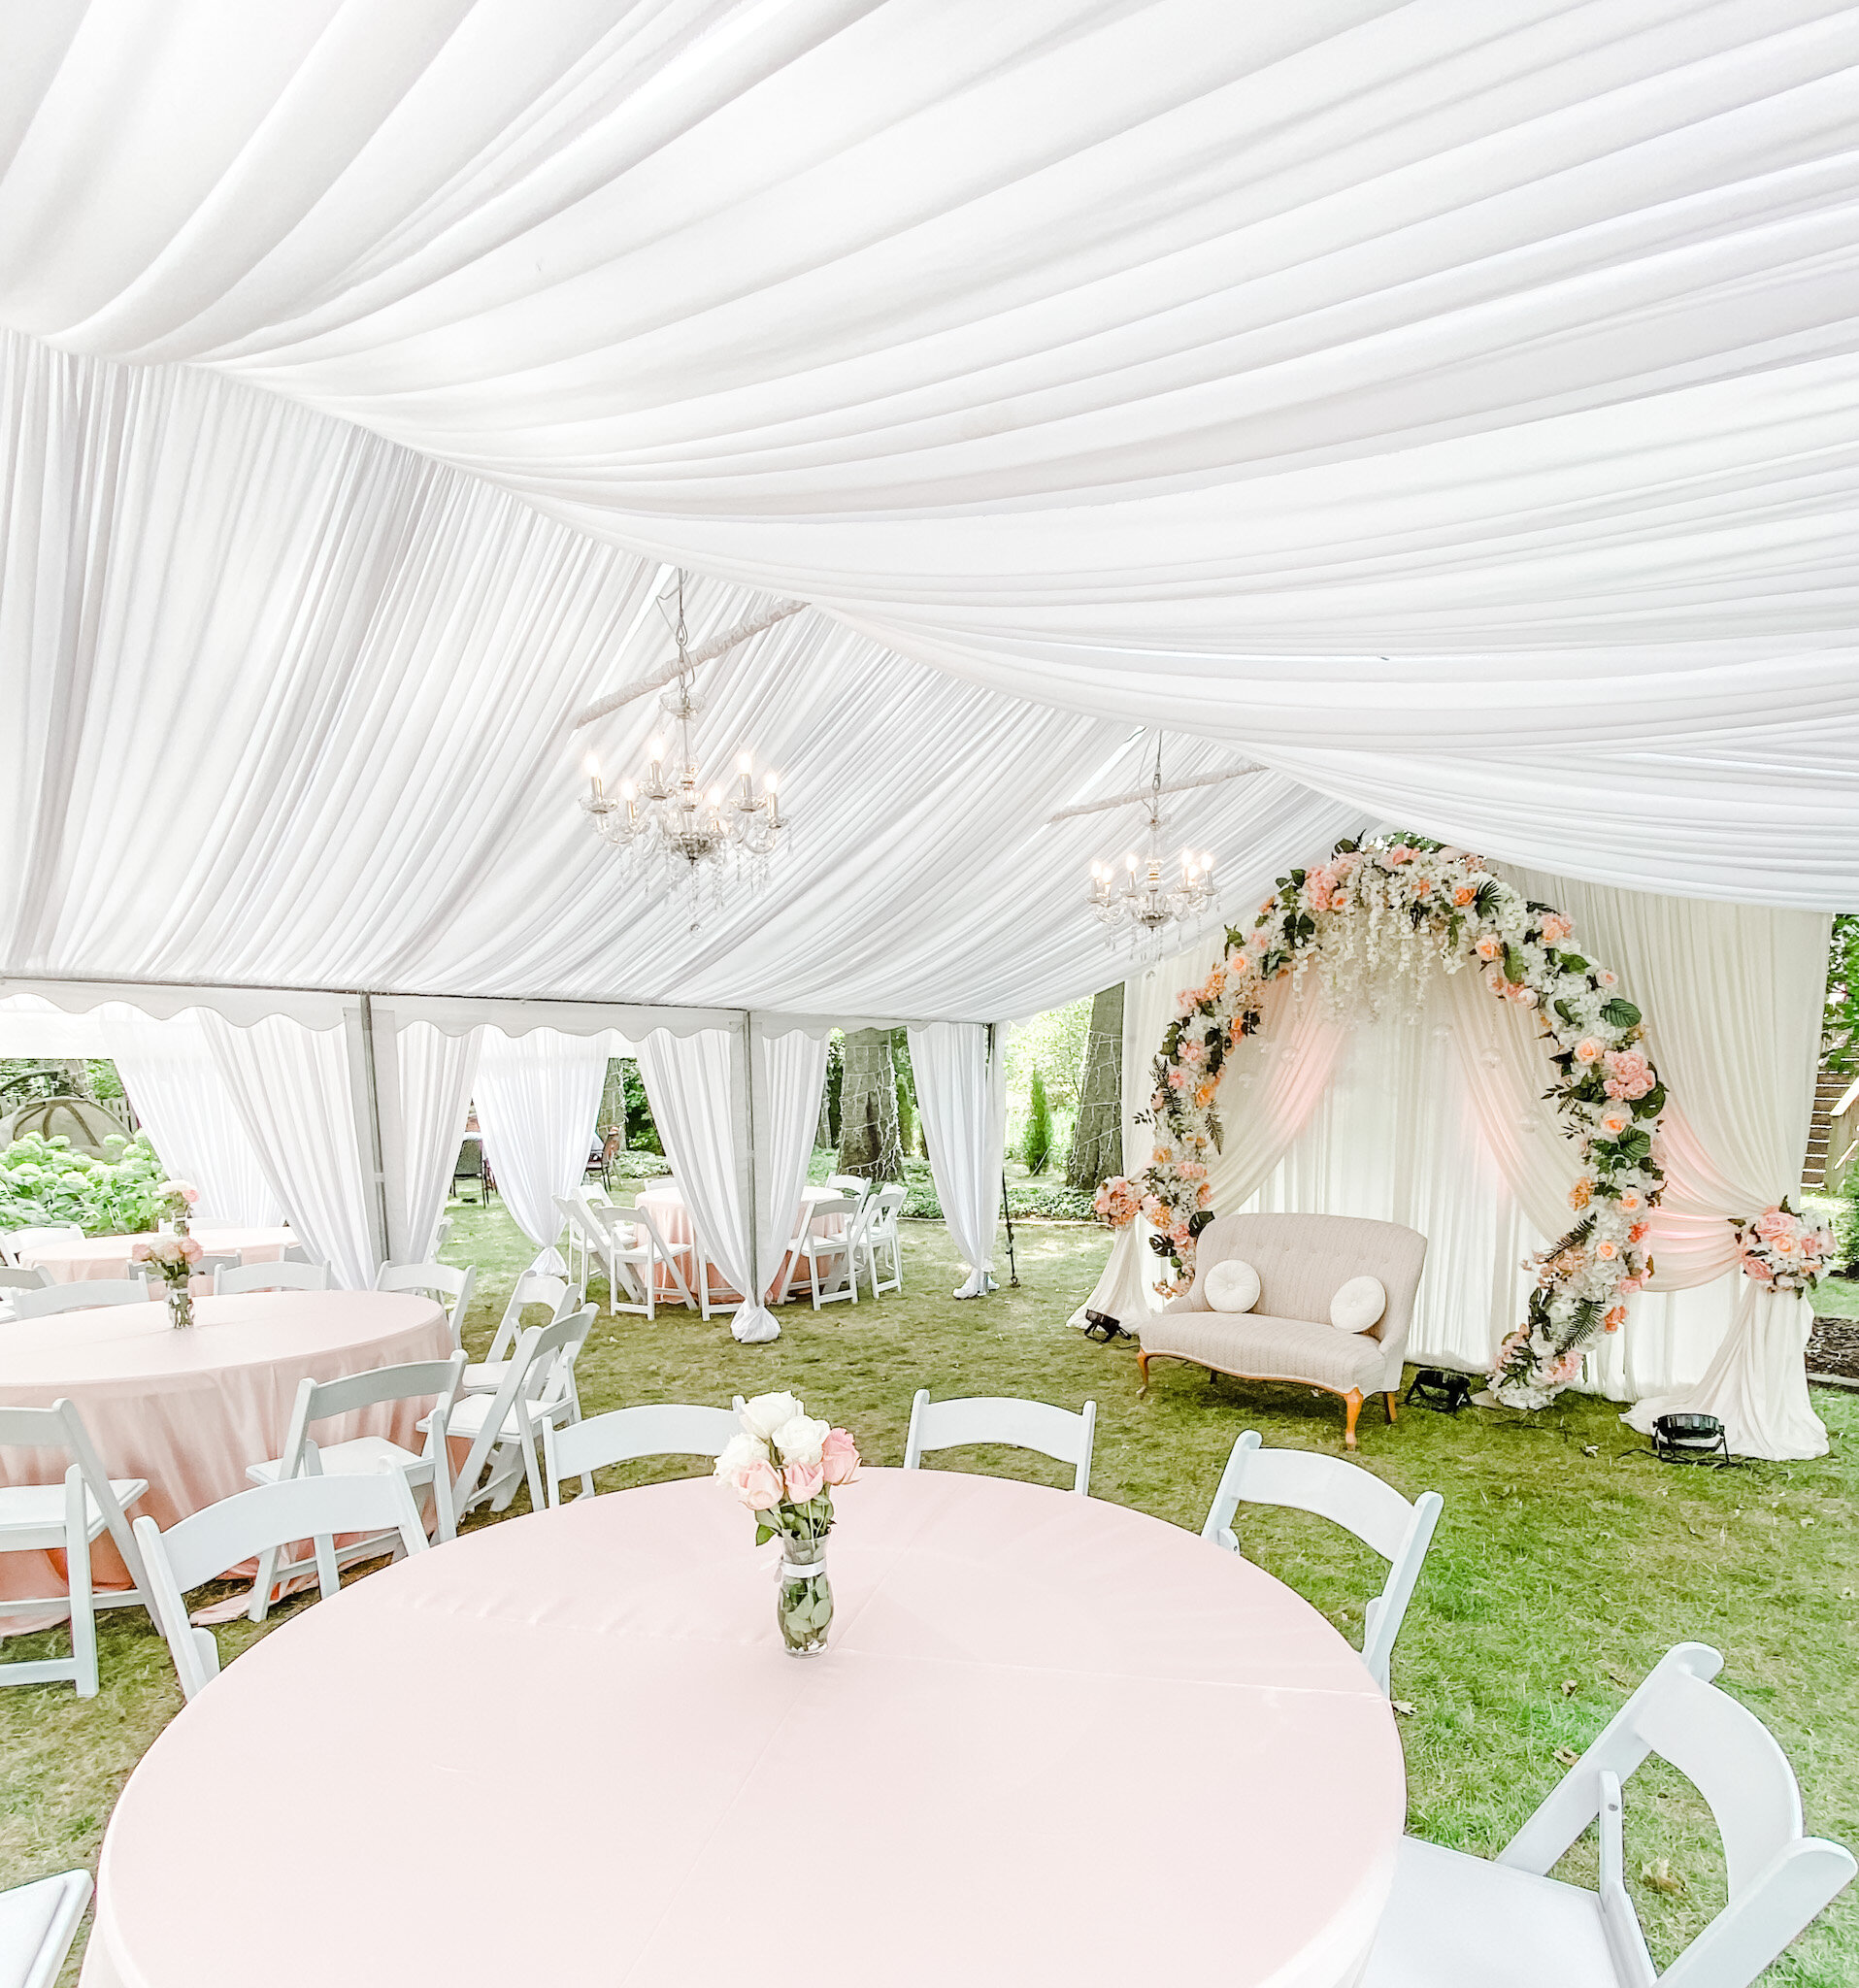 tent rental in Napervill eoutdoor party decoration backyard wedding micro wedding outdoor party rental naperville frame tents festival tent birthday party tent backyard wedding tent corpporate event tent   (7).JPG